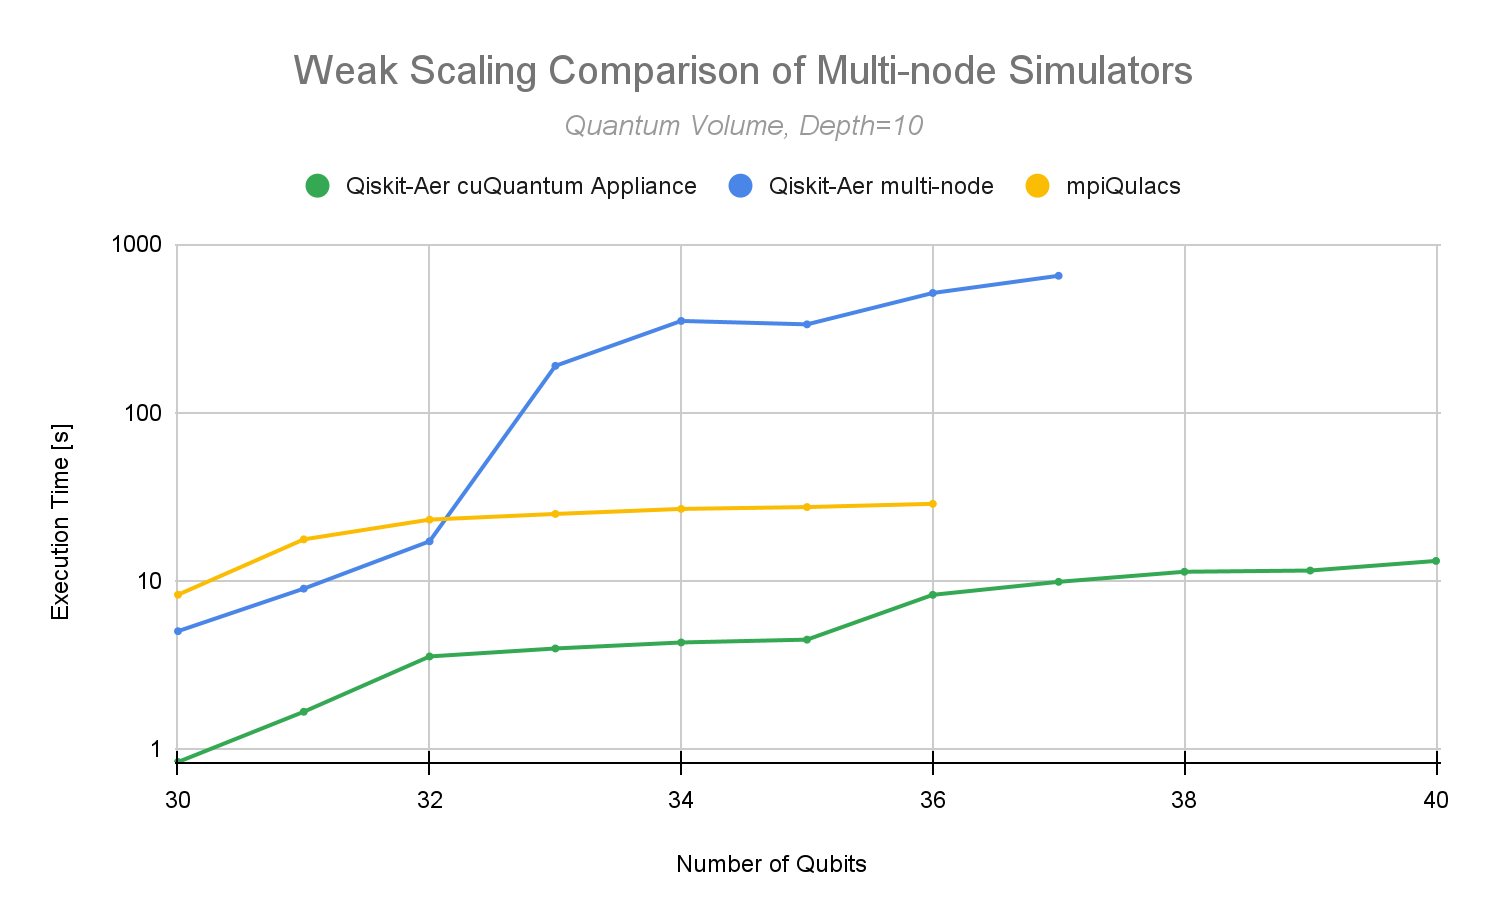 Chart showing scaling state vector-based quantum circuit simulations from 30 to 40 qubits, of Quantum Volume with a depth of 10. cuQuantum Appliance and Qiskit Aer multi-node was run on NVIDIA A100 40GB GPUs on AIST’s ABCI supercomputer. The cuQuantum Appliance scaled up to 512 GPUs (64 nodes), made easy by our new multi-node capability. At 36 qubits, the cuQuantum appliance is up to 62x faster than Qiskit multi-node on the same GPUs, and 3.4x faster than mpiQulacs on Fujitsu’s A64FX CPU. 